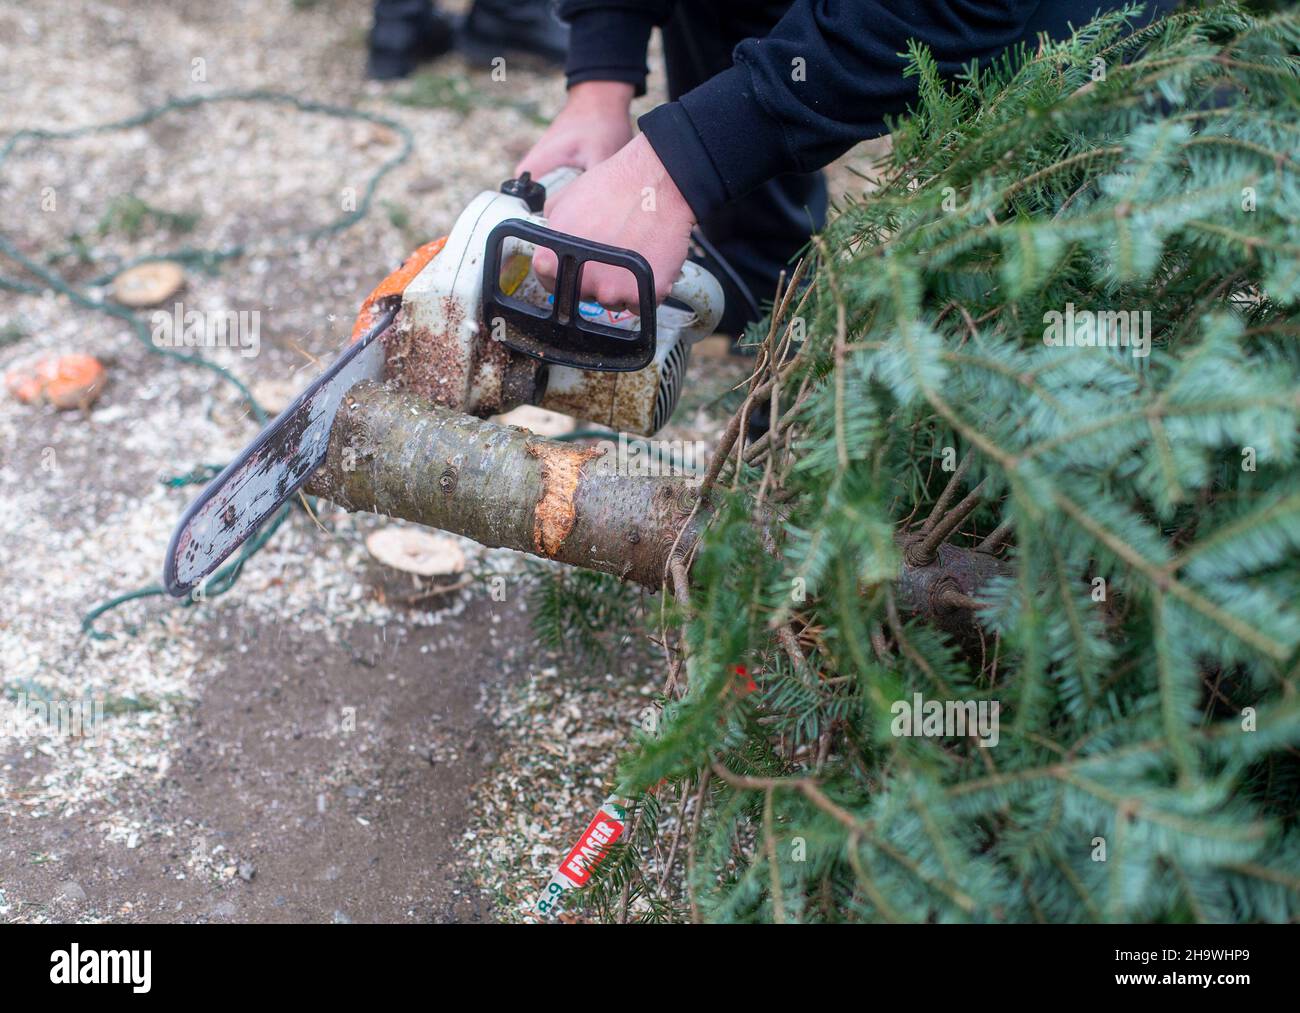 Cutting the trunk of a Christmas tree with a chainsaw Stock Photo